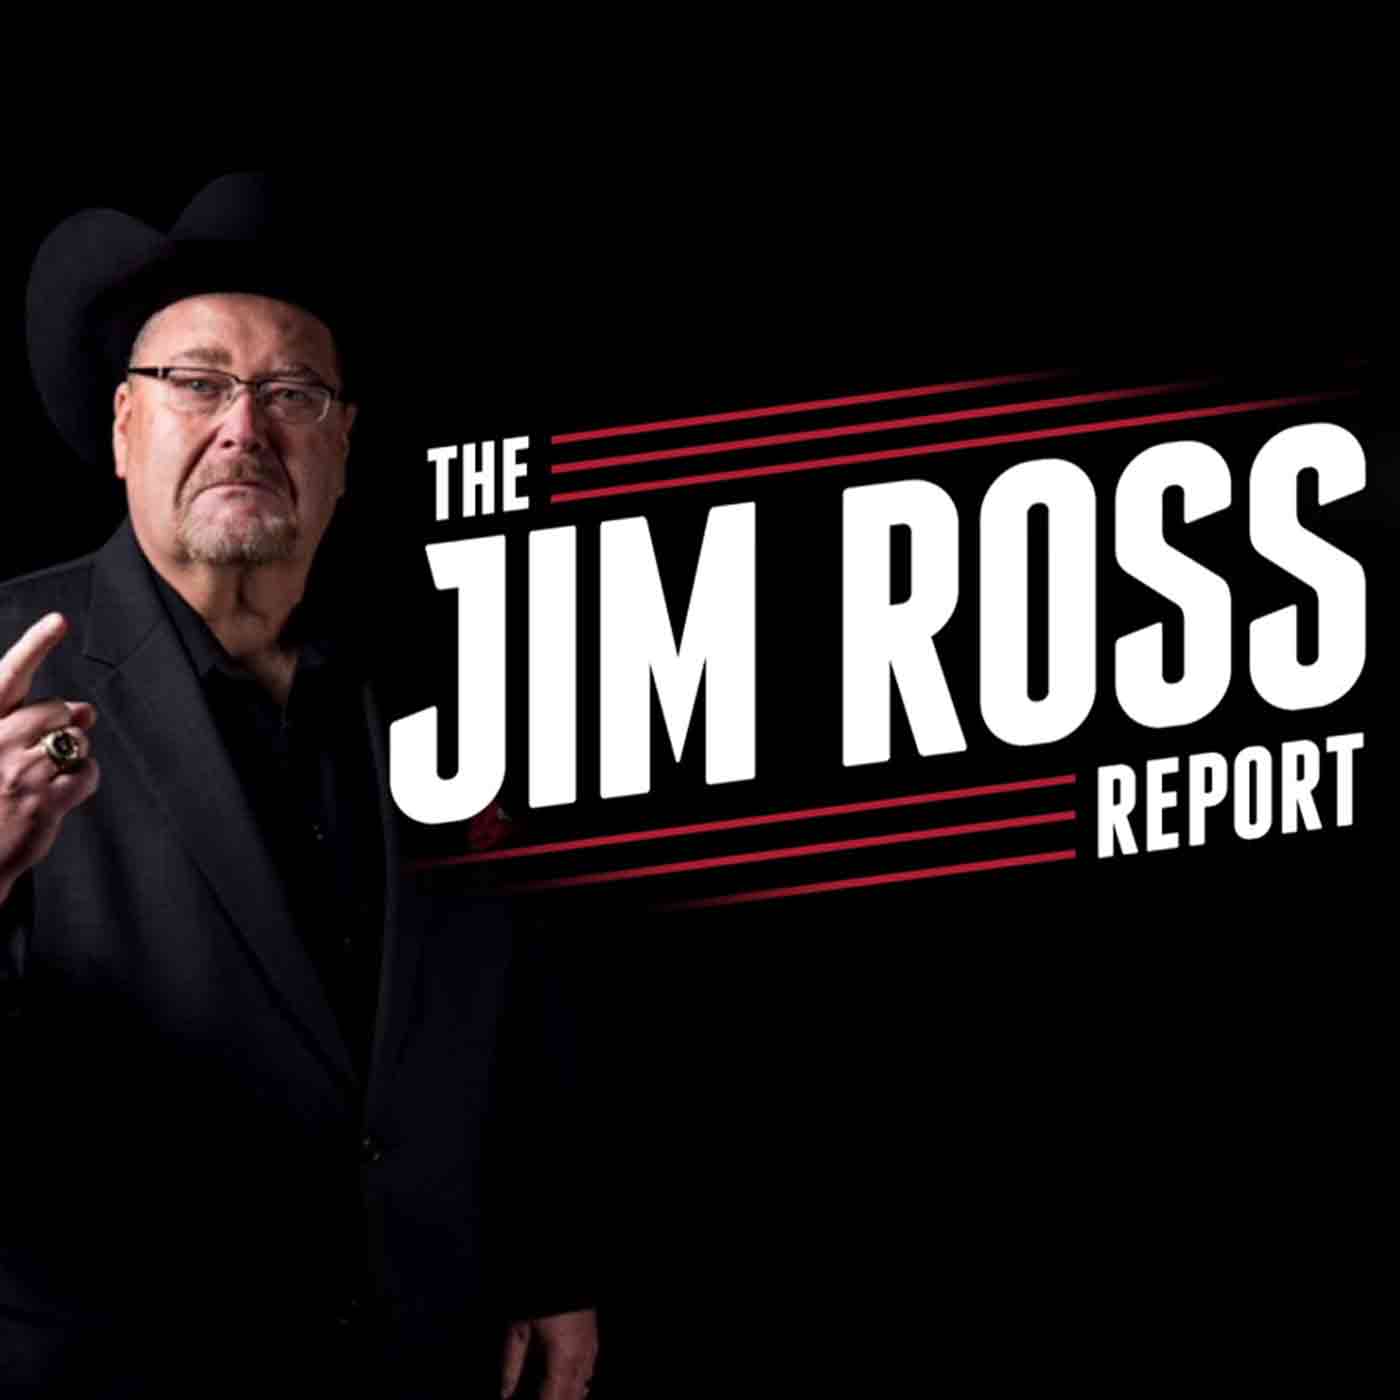 SPECIAL EVENT OF THE JIM ROSS REPORT